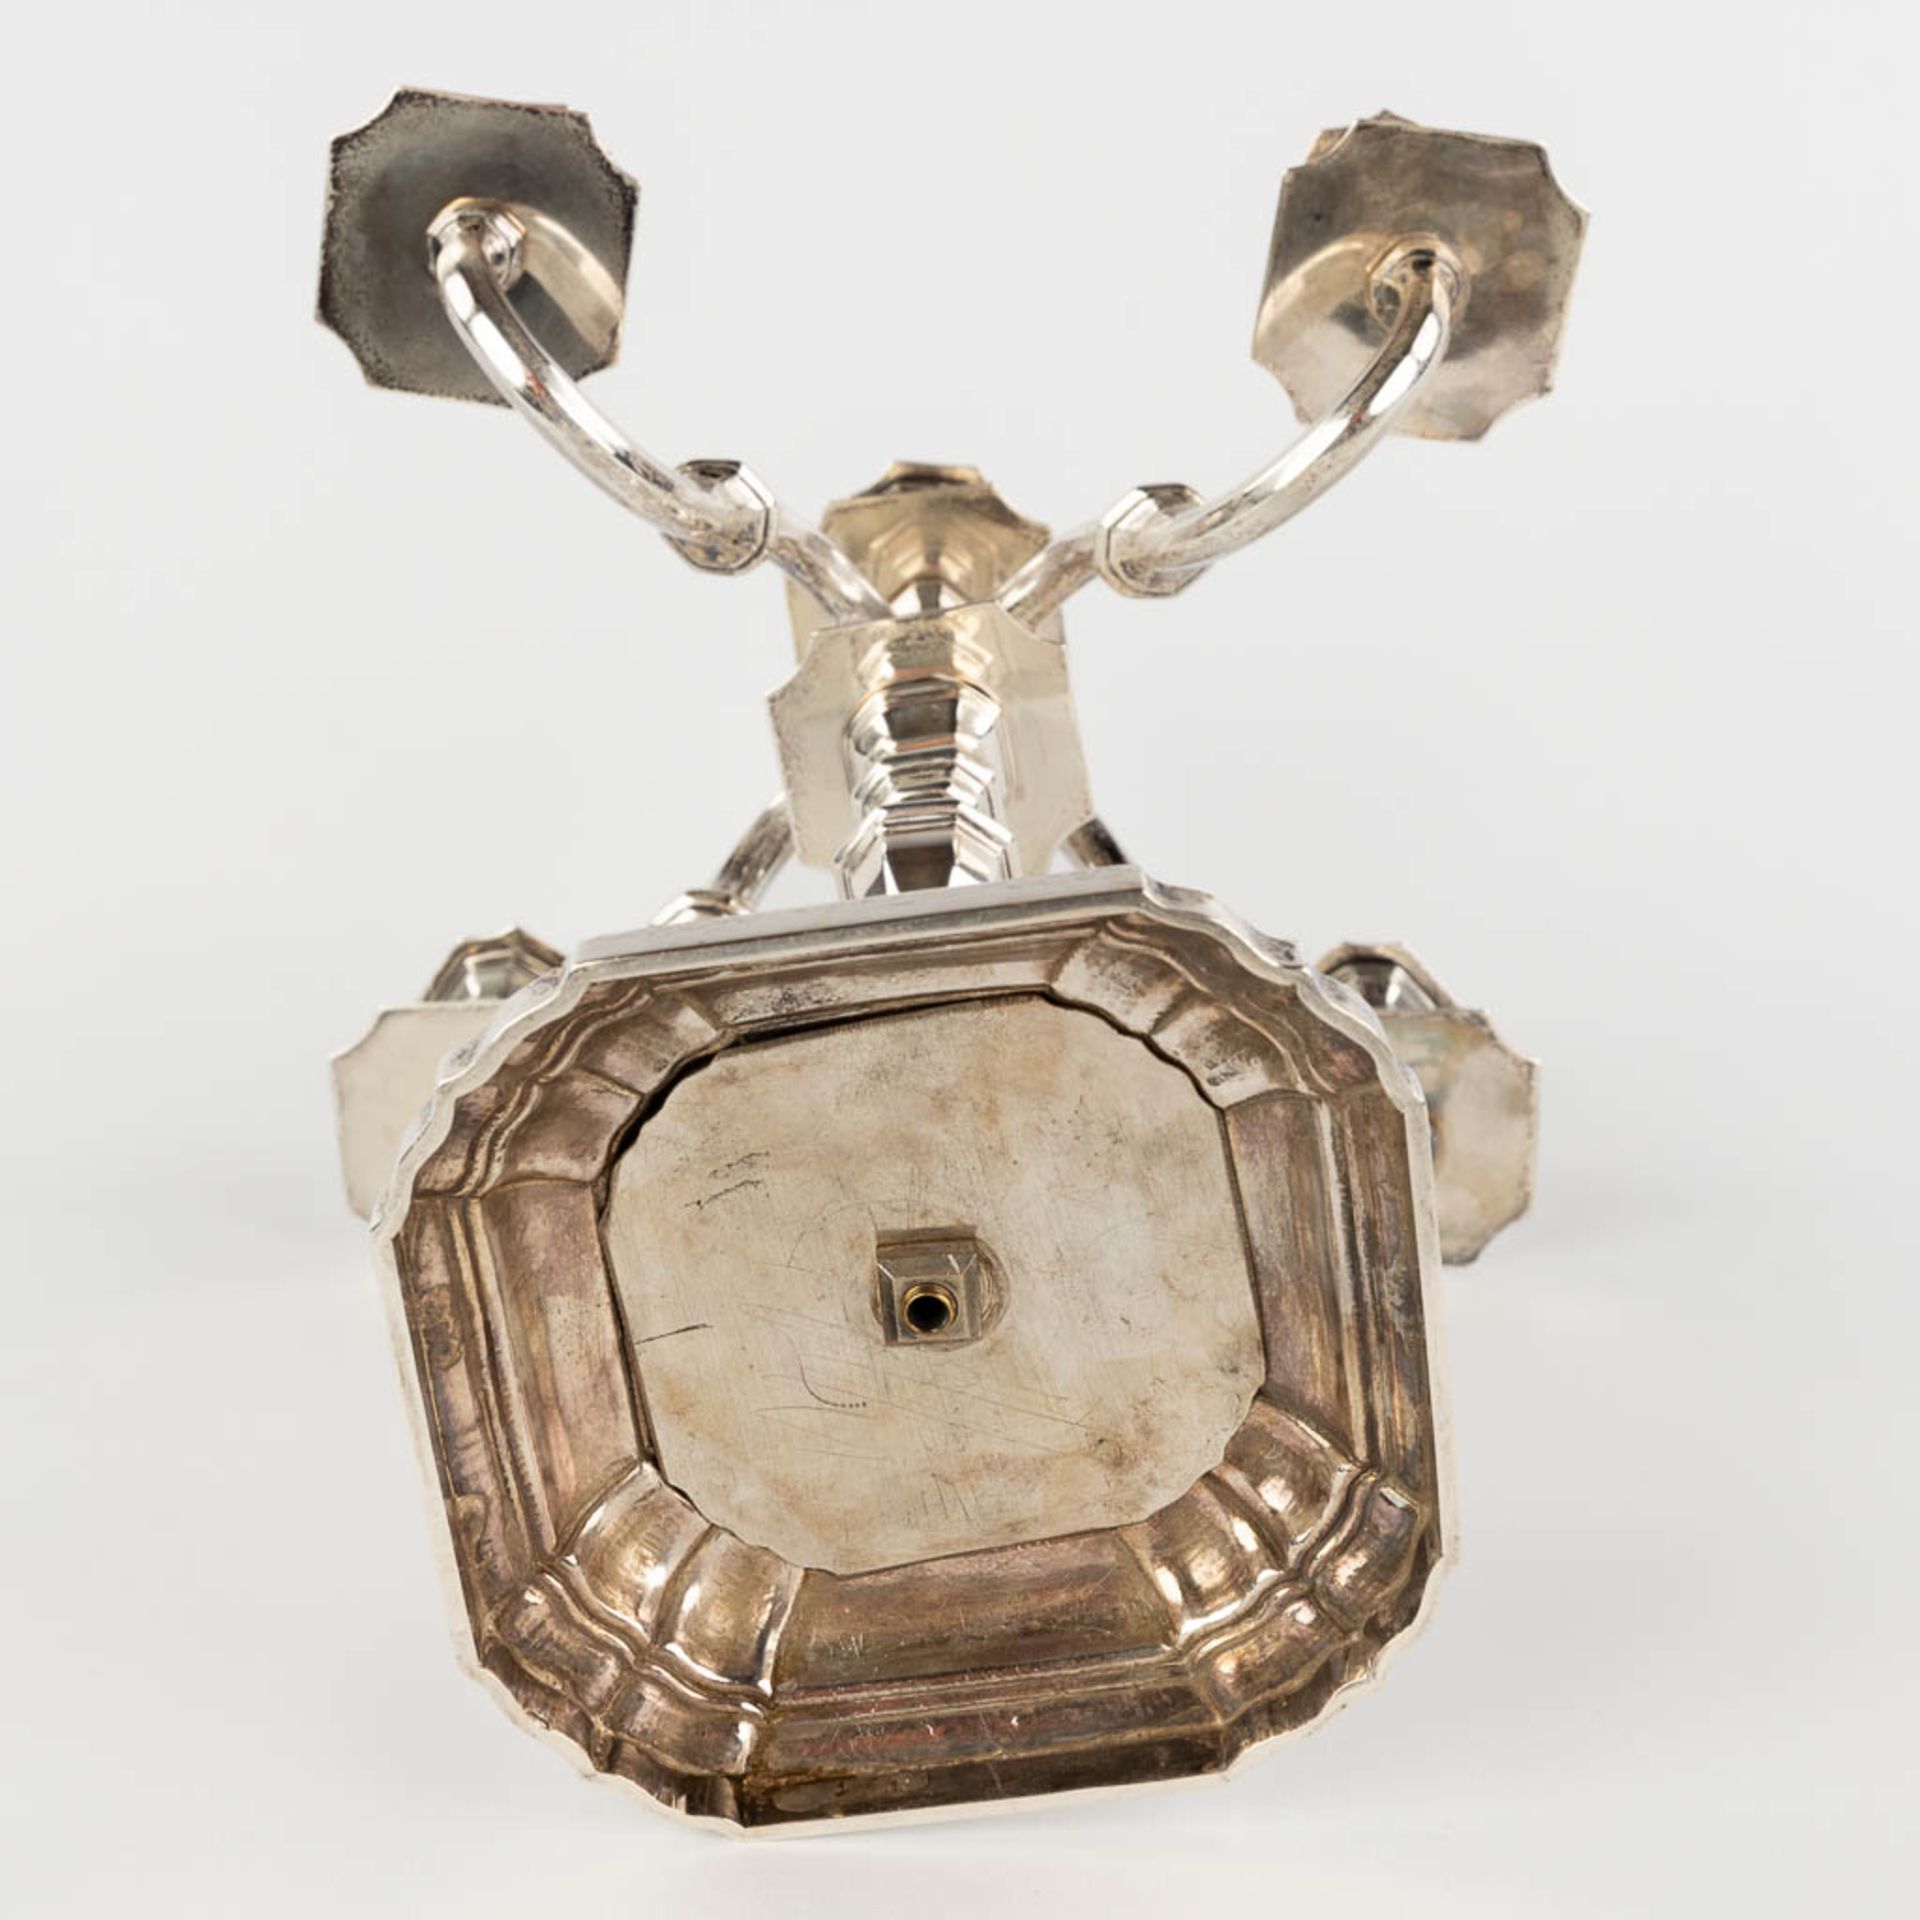 A silver 5 candle candelabra, 950M. Signed Lens Anvers. Belgium, 20th C. (L:23,5 x W:23,5 x H:33 cm) - Image 7 of 10